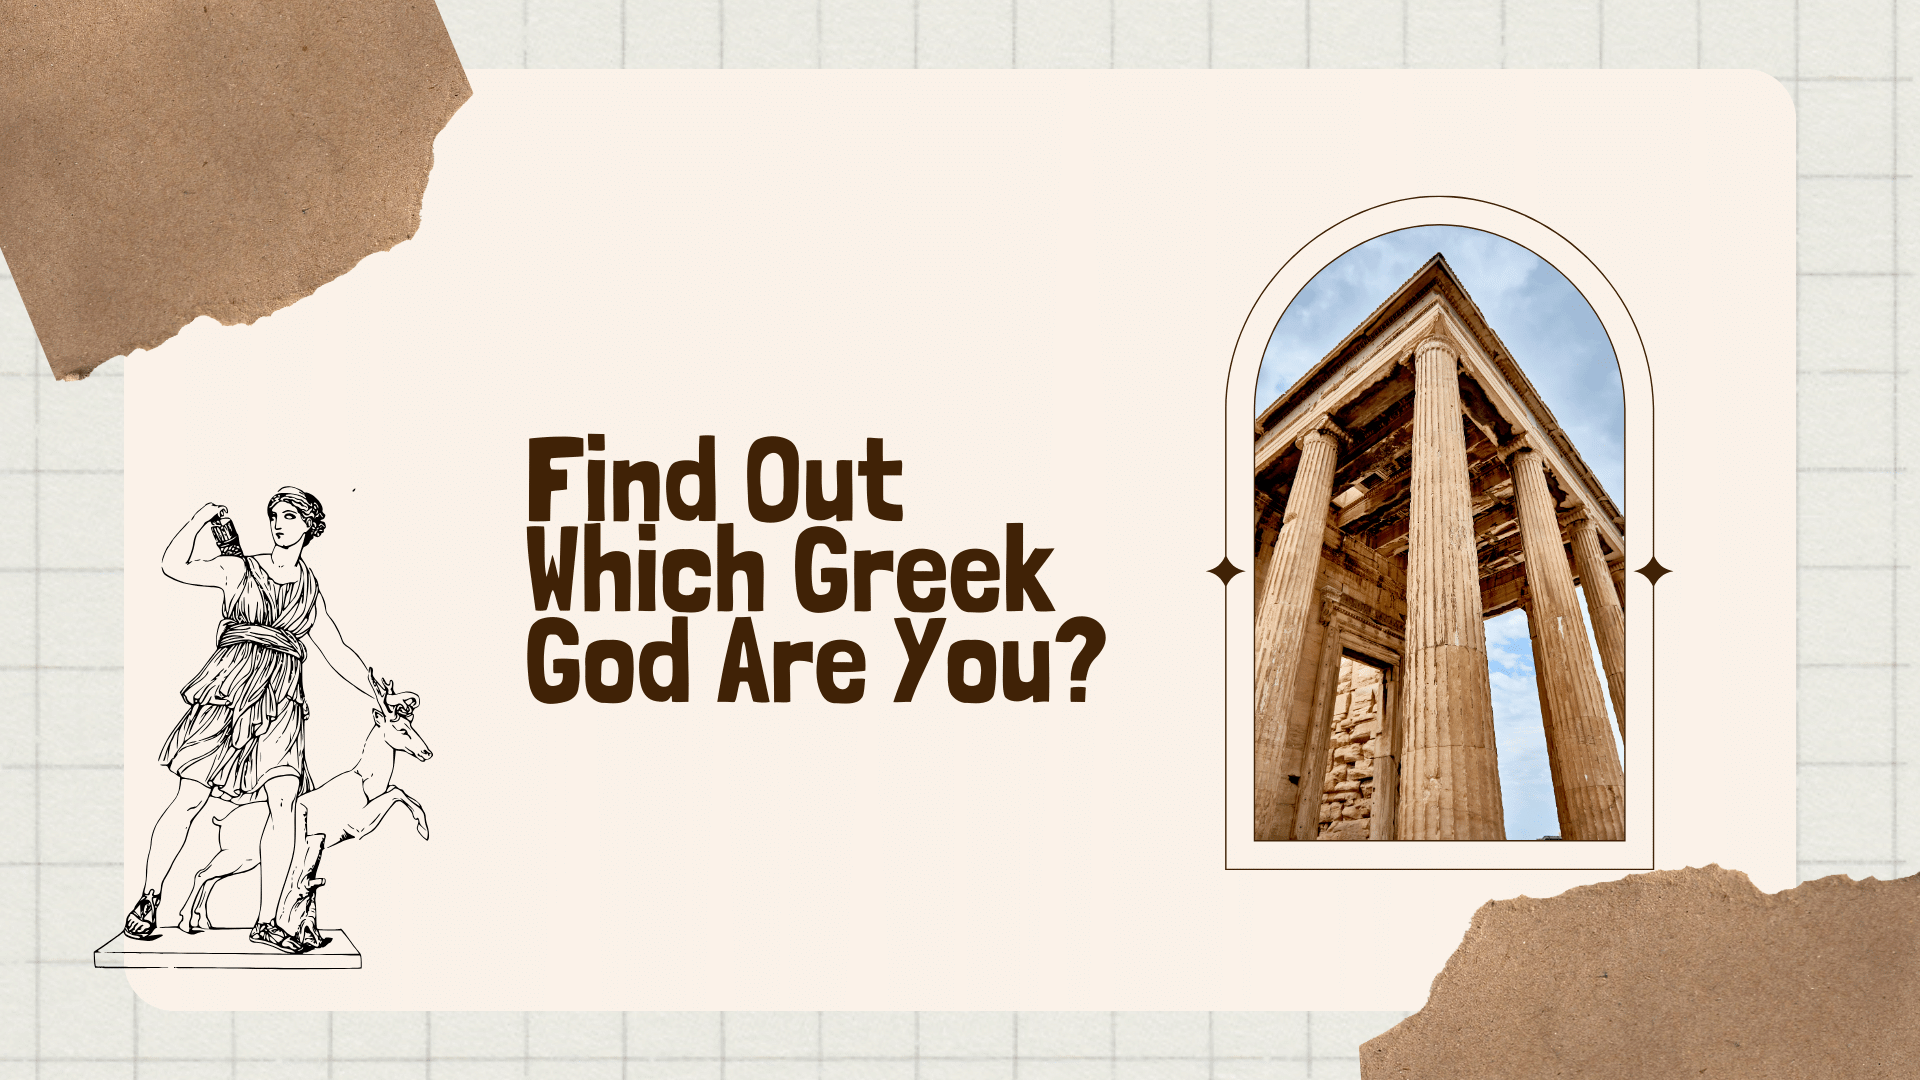 Find Out Which Greek God Are You?